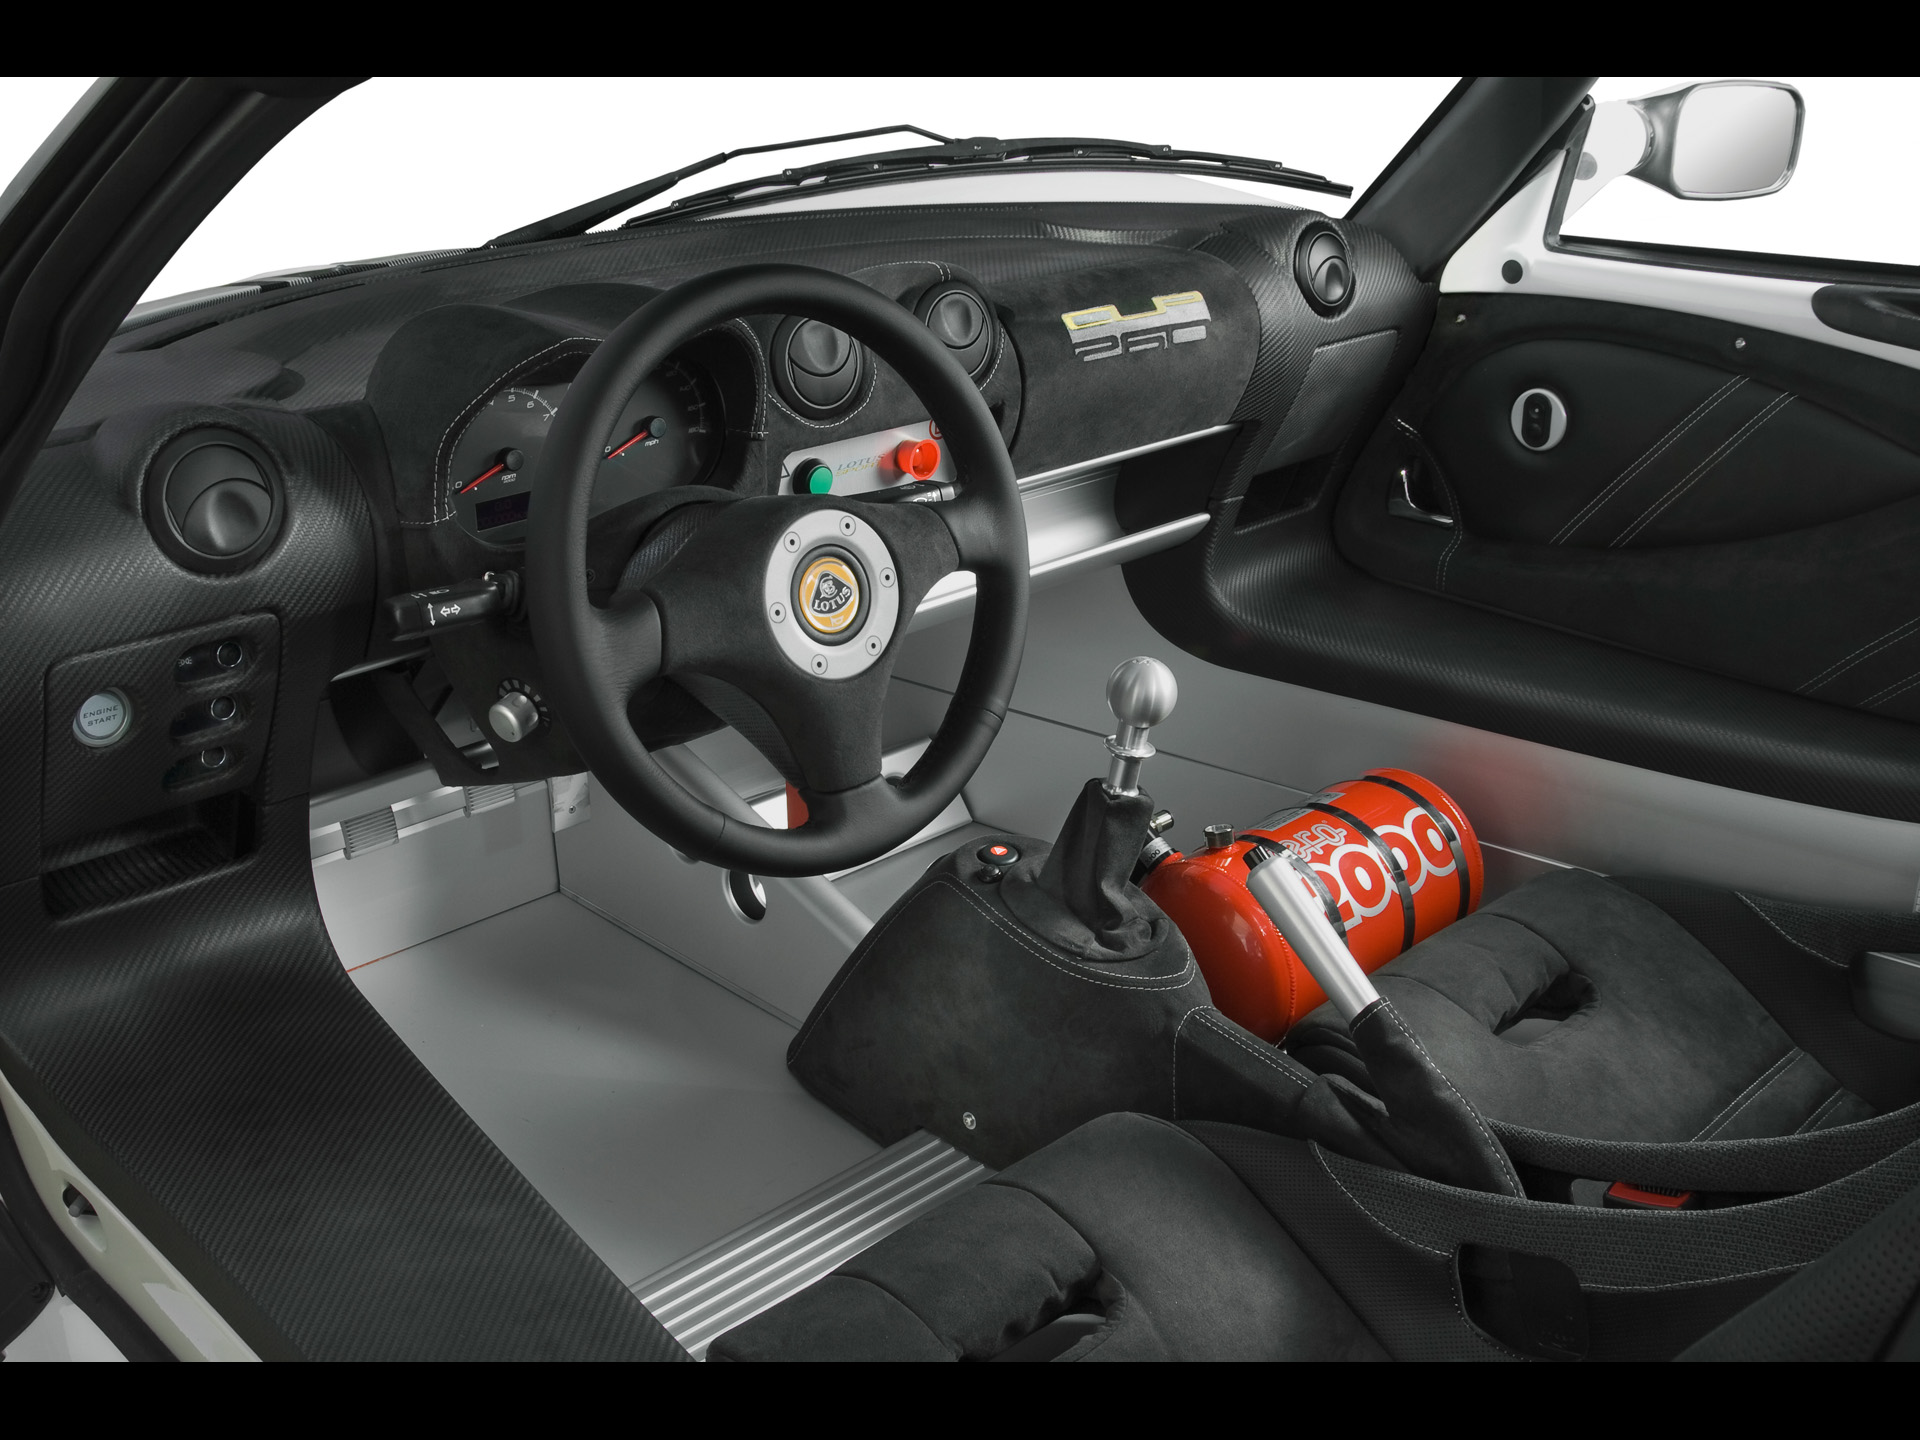 Elise S2 111s (vvc Rover) - Ruby Red - Pagina 7 2009-Lotus-Exige-Cup-260-Interior-1920x1440